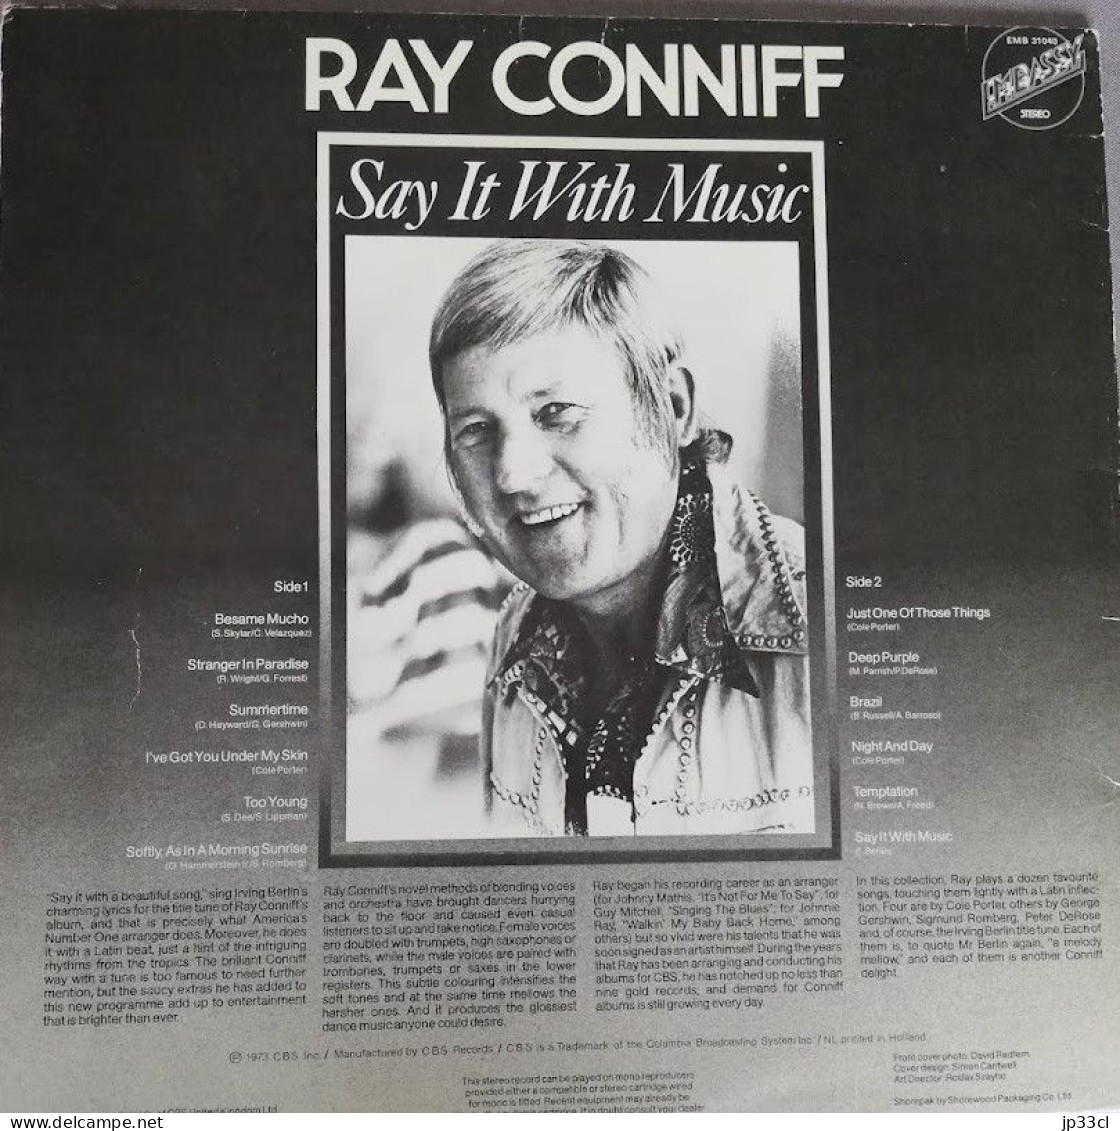 Lot de treize 33 T de Ray Conniff and his orchestra and chorus